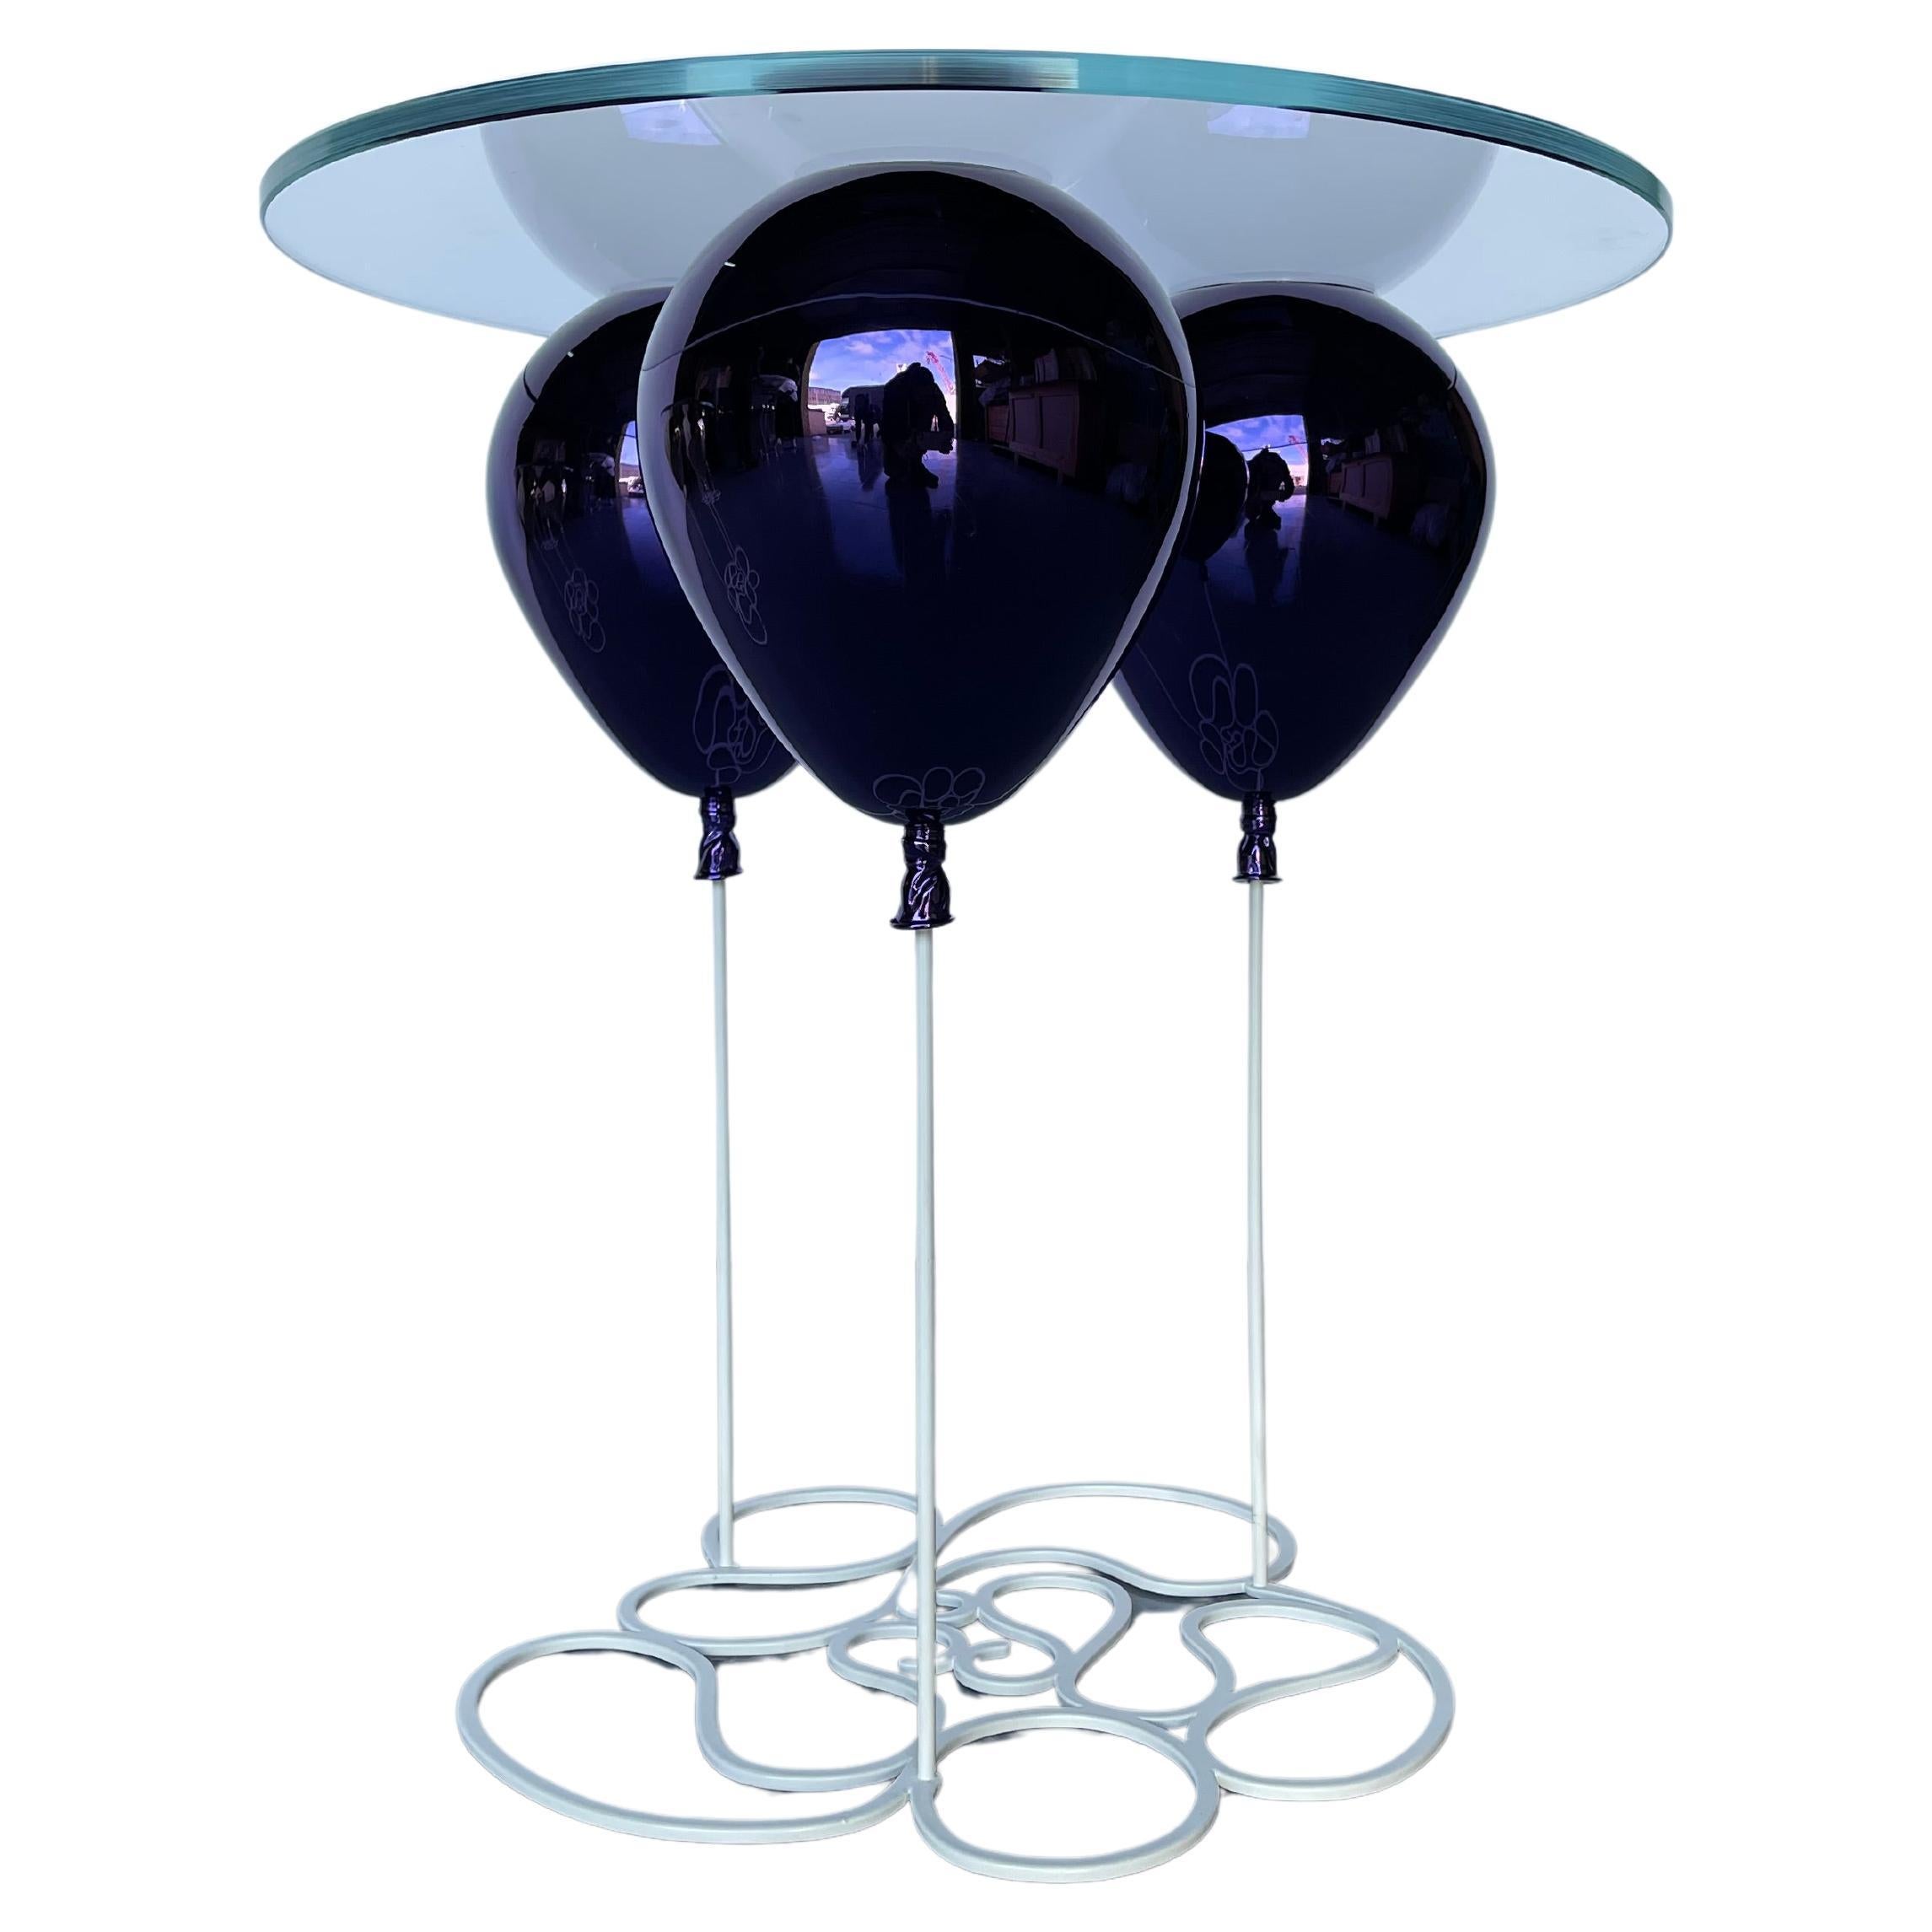 Small, Circular Side Table with Purple Balloon and Glass Table-Top For Sale